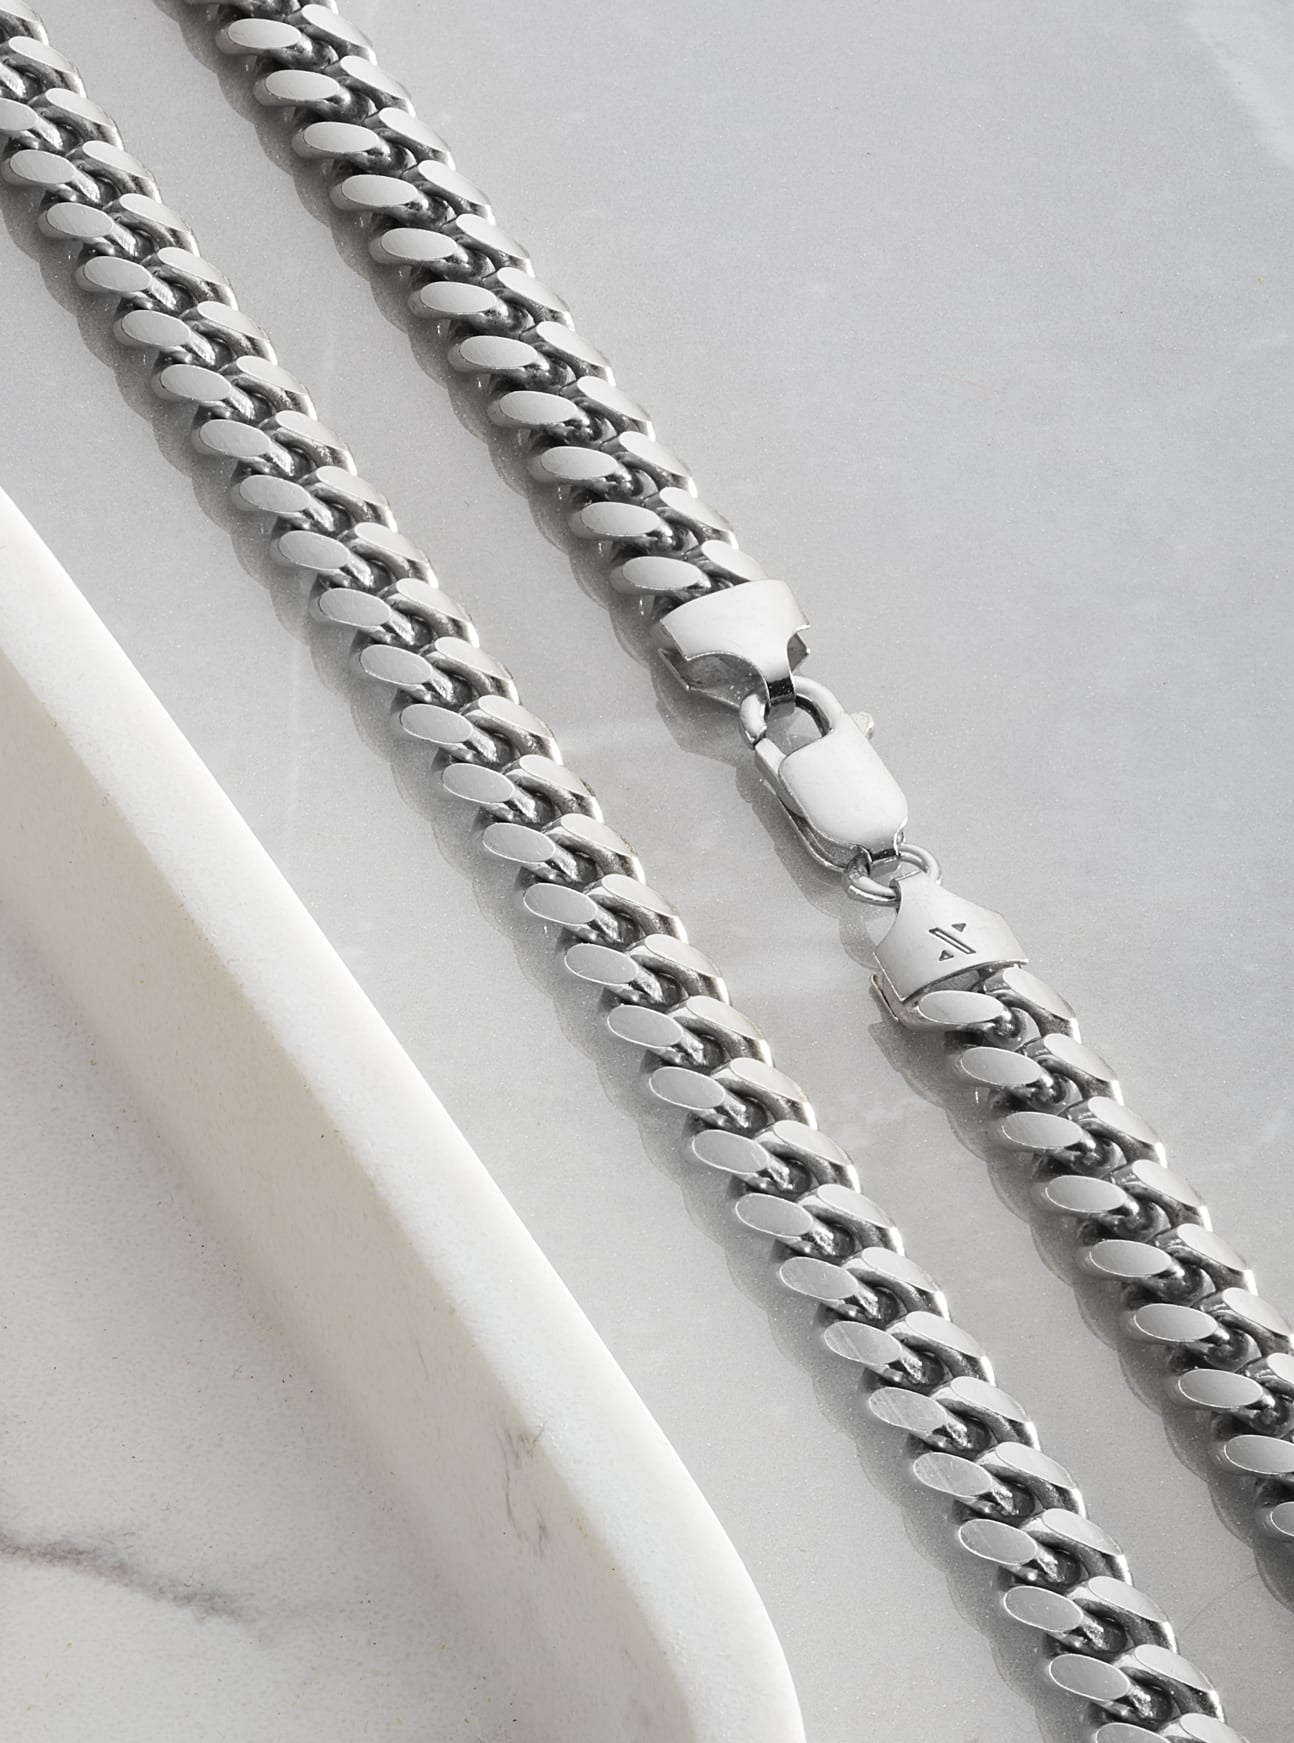 Image Cuban Link Chain - 7mm Silver - Higher Quality Standards